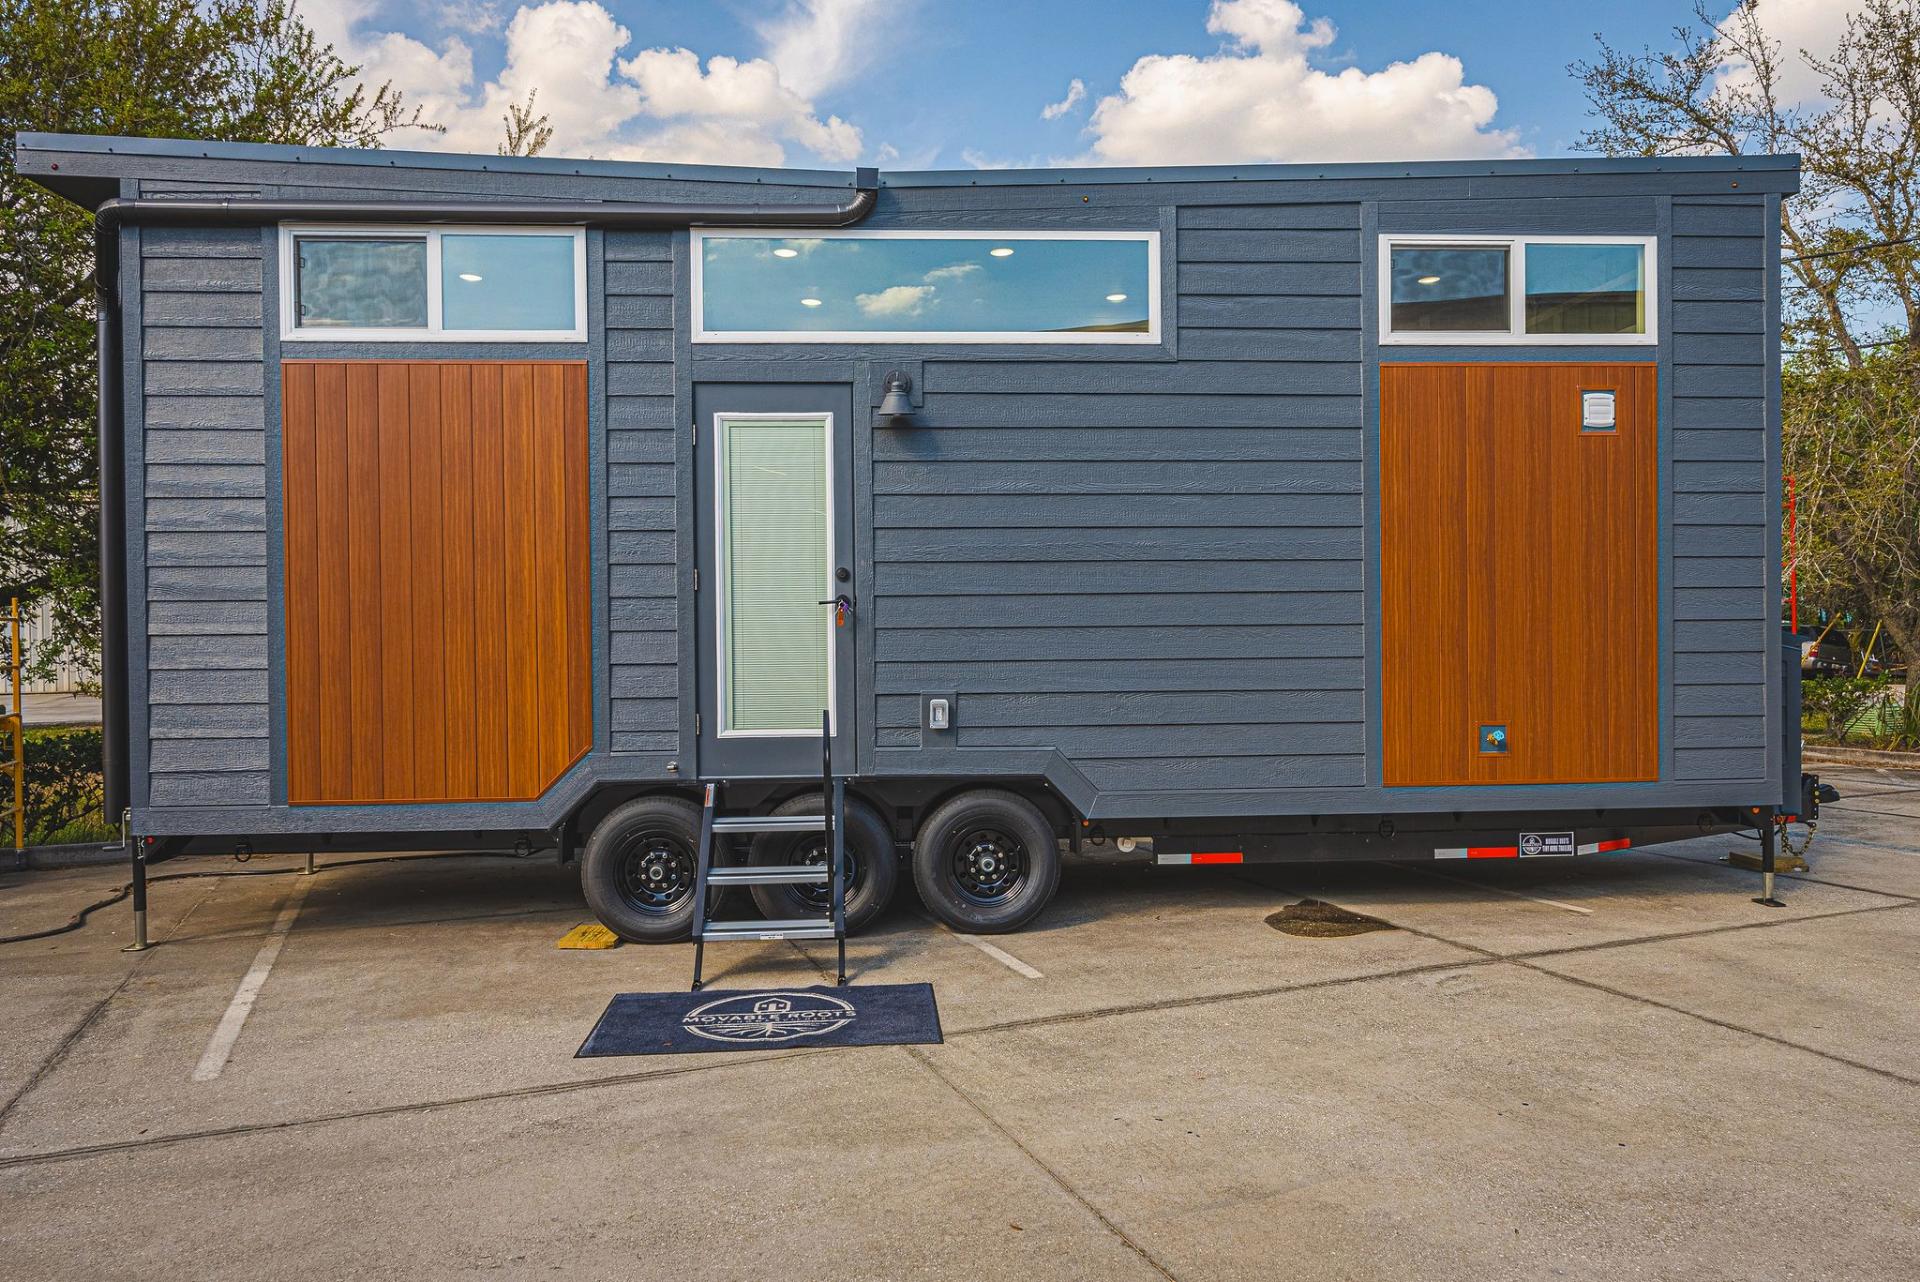 Custom Built Tiny House For a Mother of Two - Adams by Movable Roots